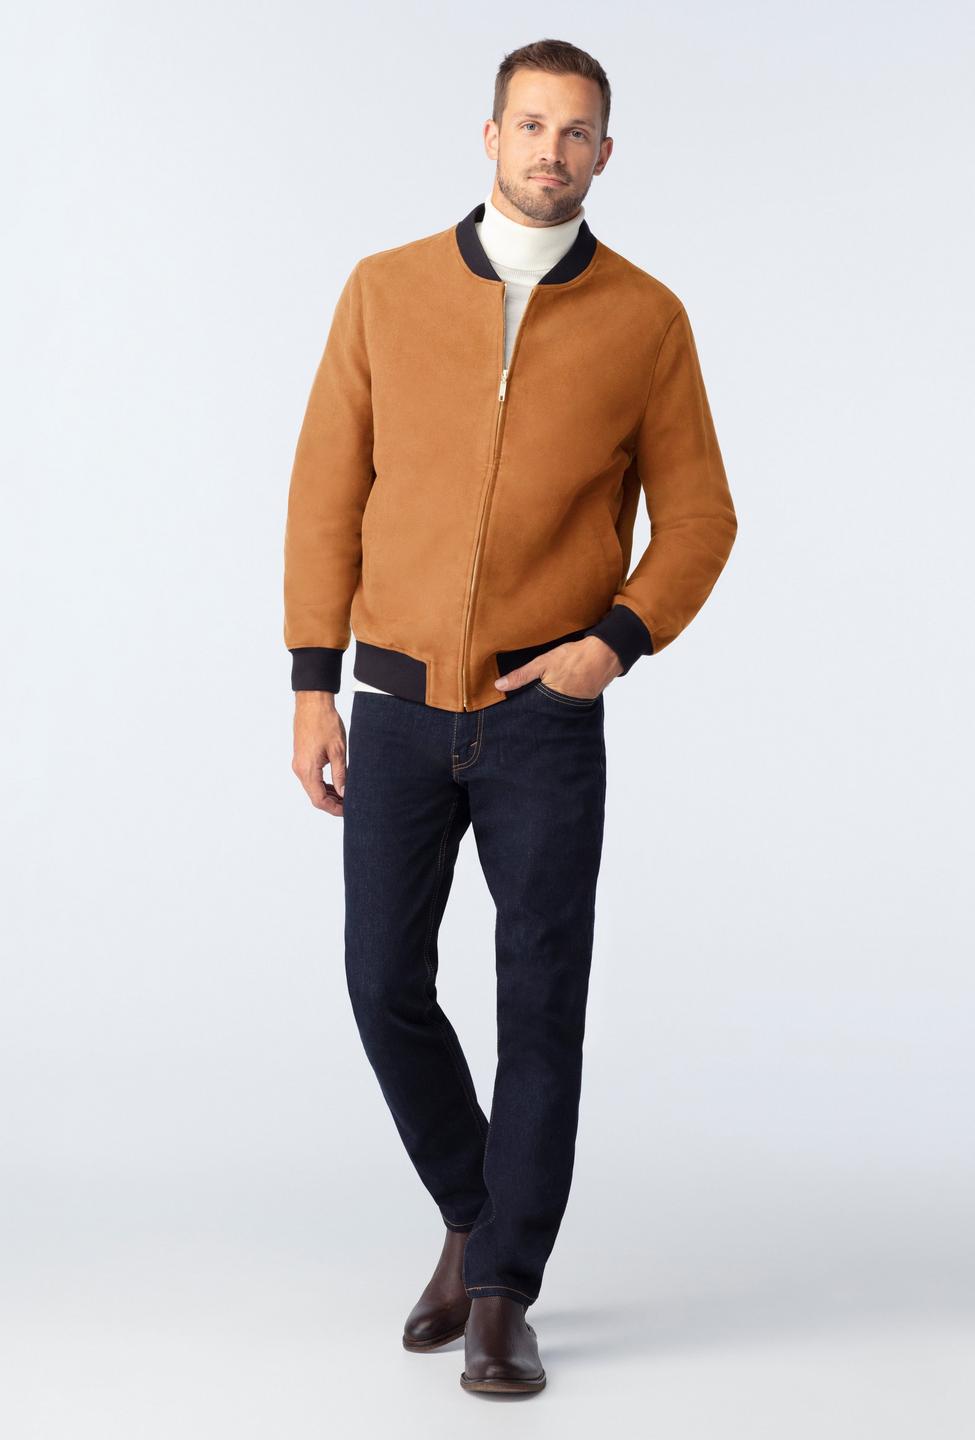 Camel bomberjacket - Fleetwood Solid Design from Indochino Collection